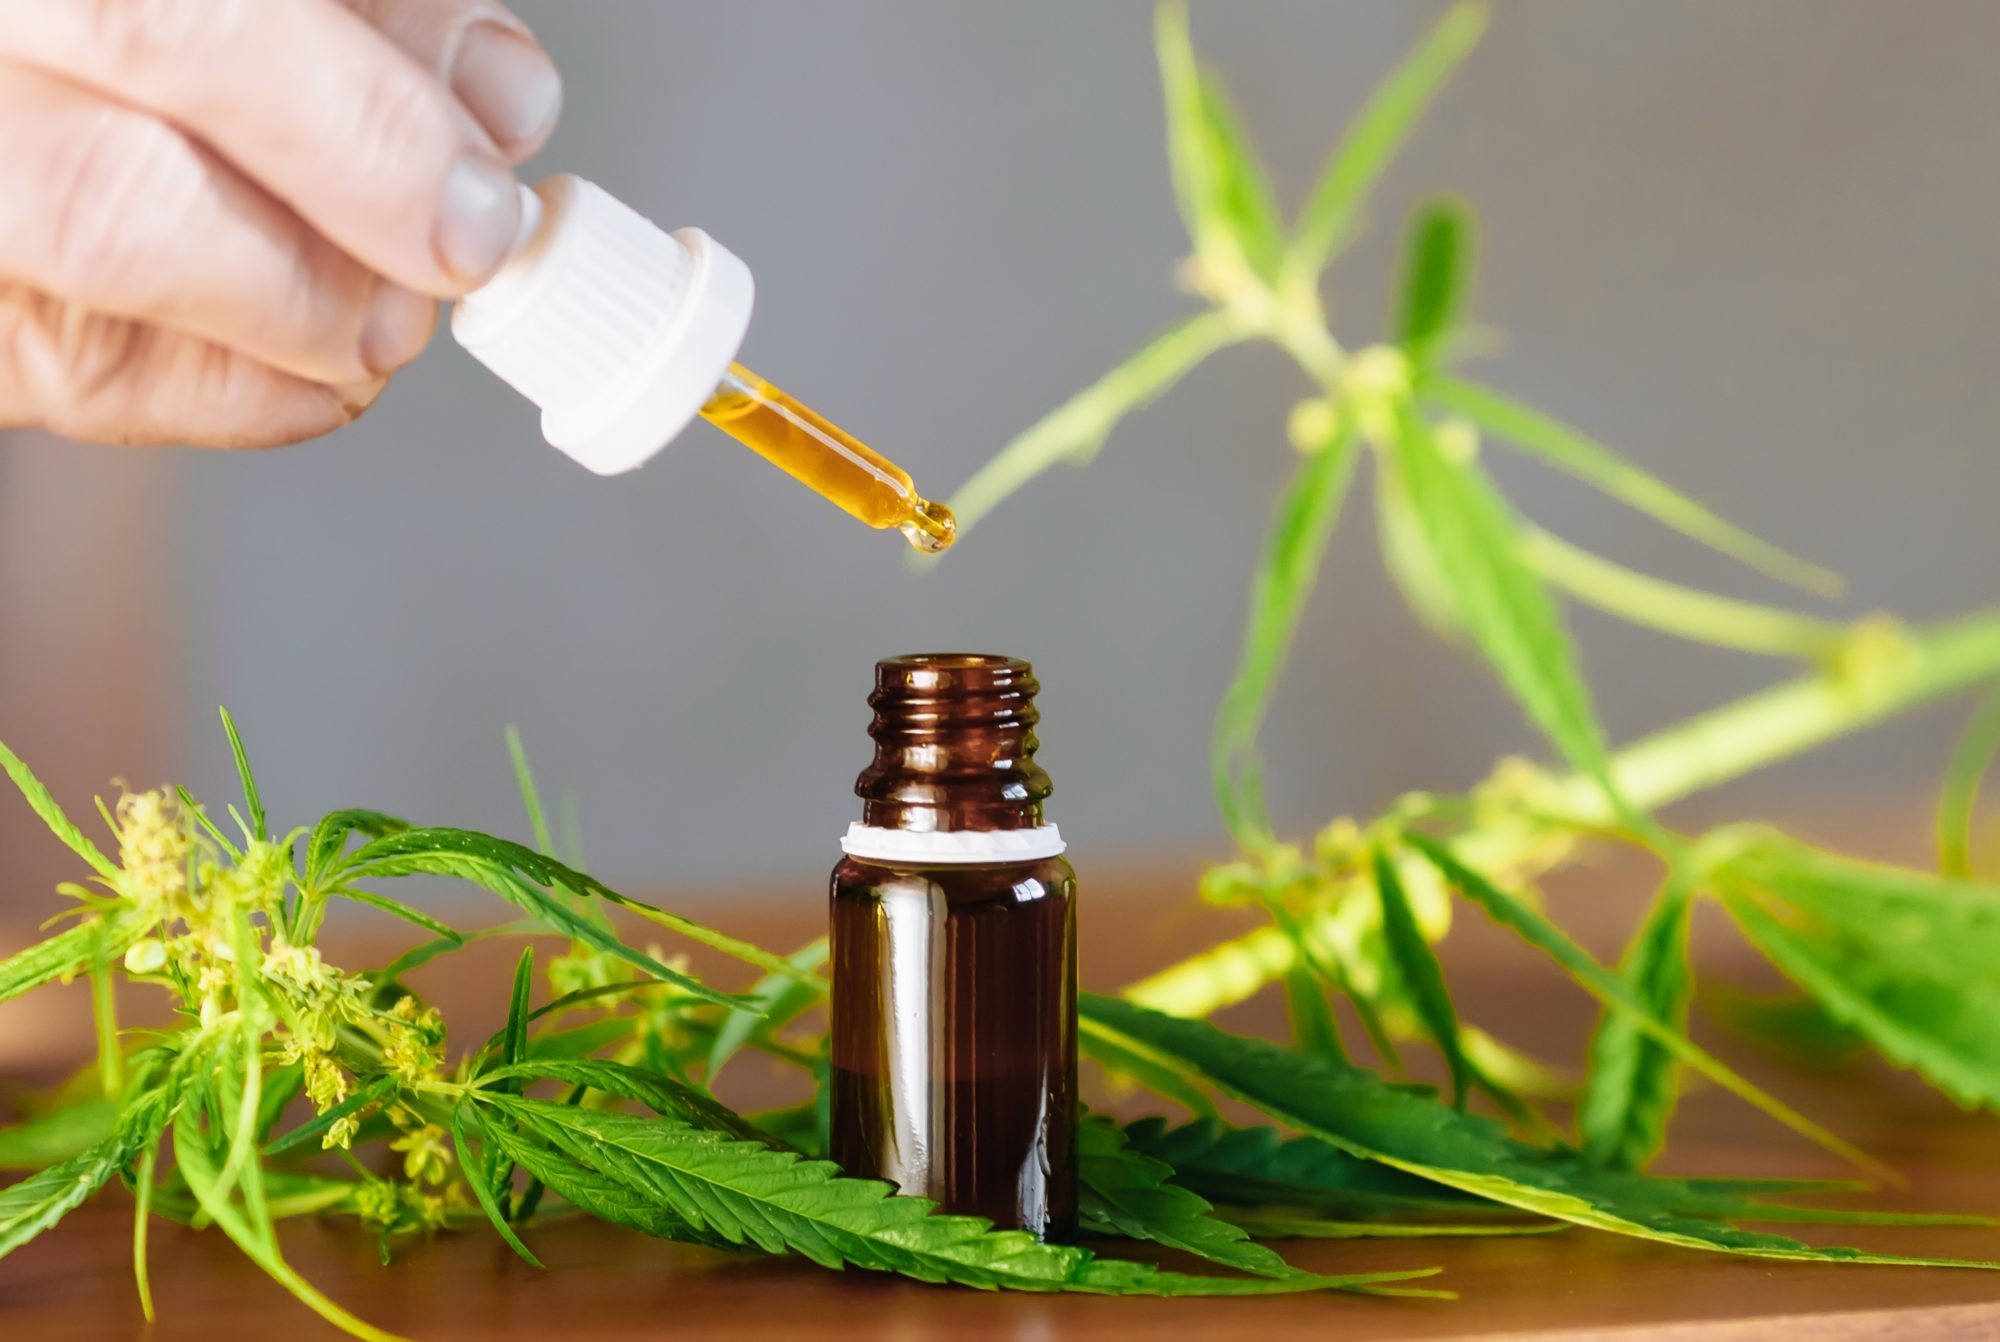 6 Things To Consider When Private Labeling CBD Products